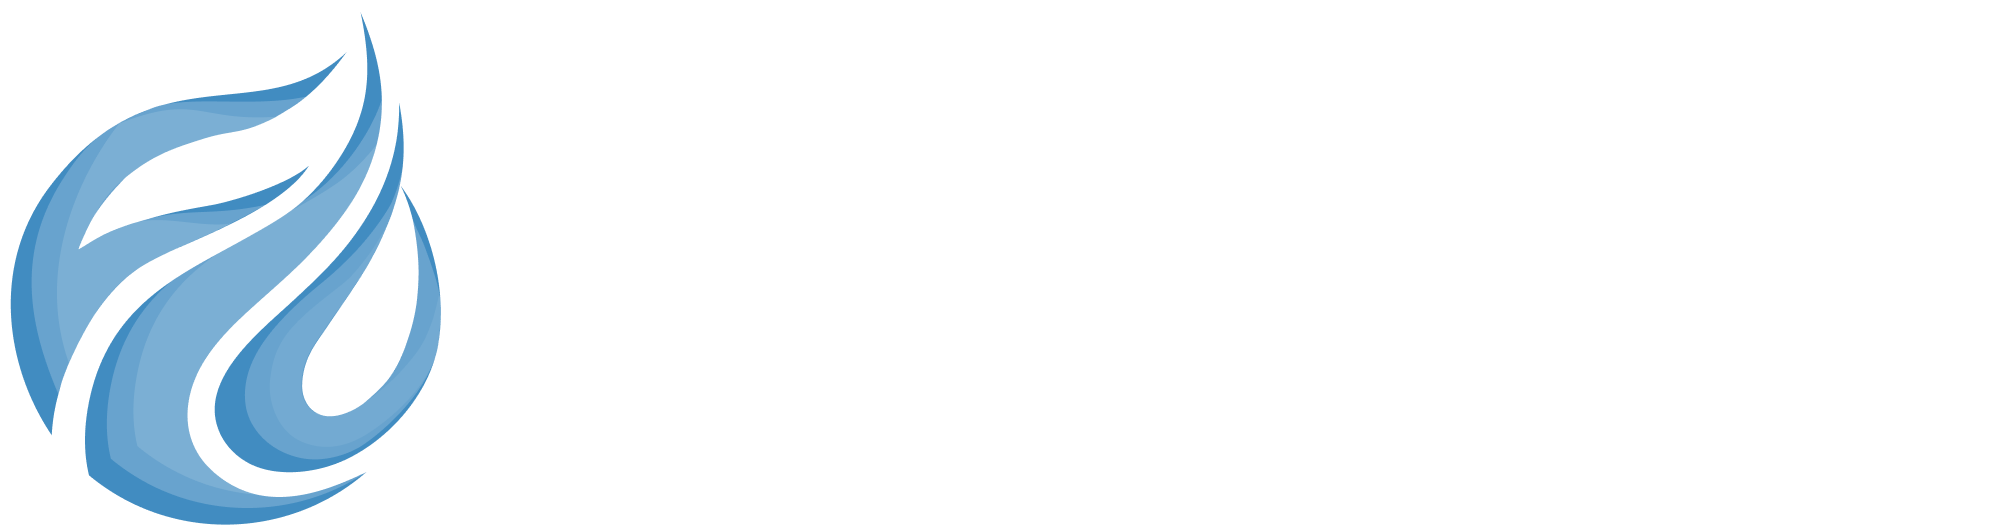 FLO Physical Therapy & Performance